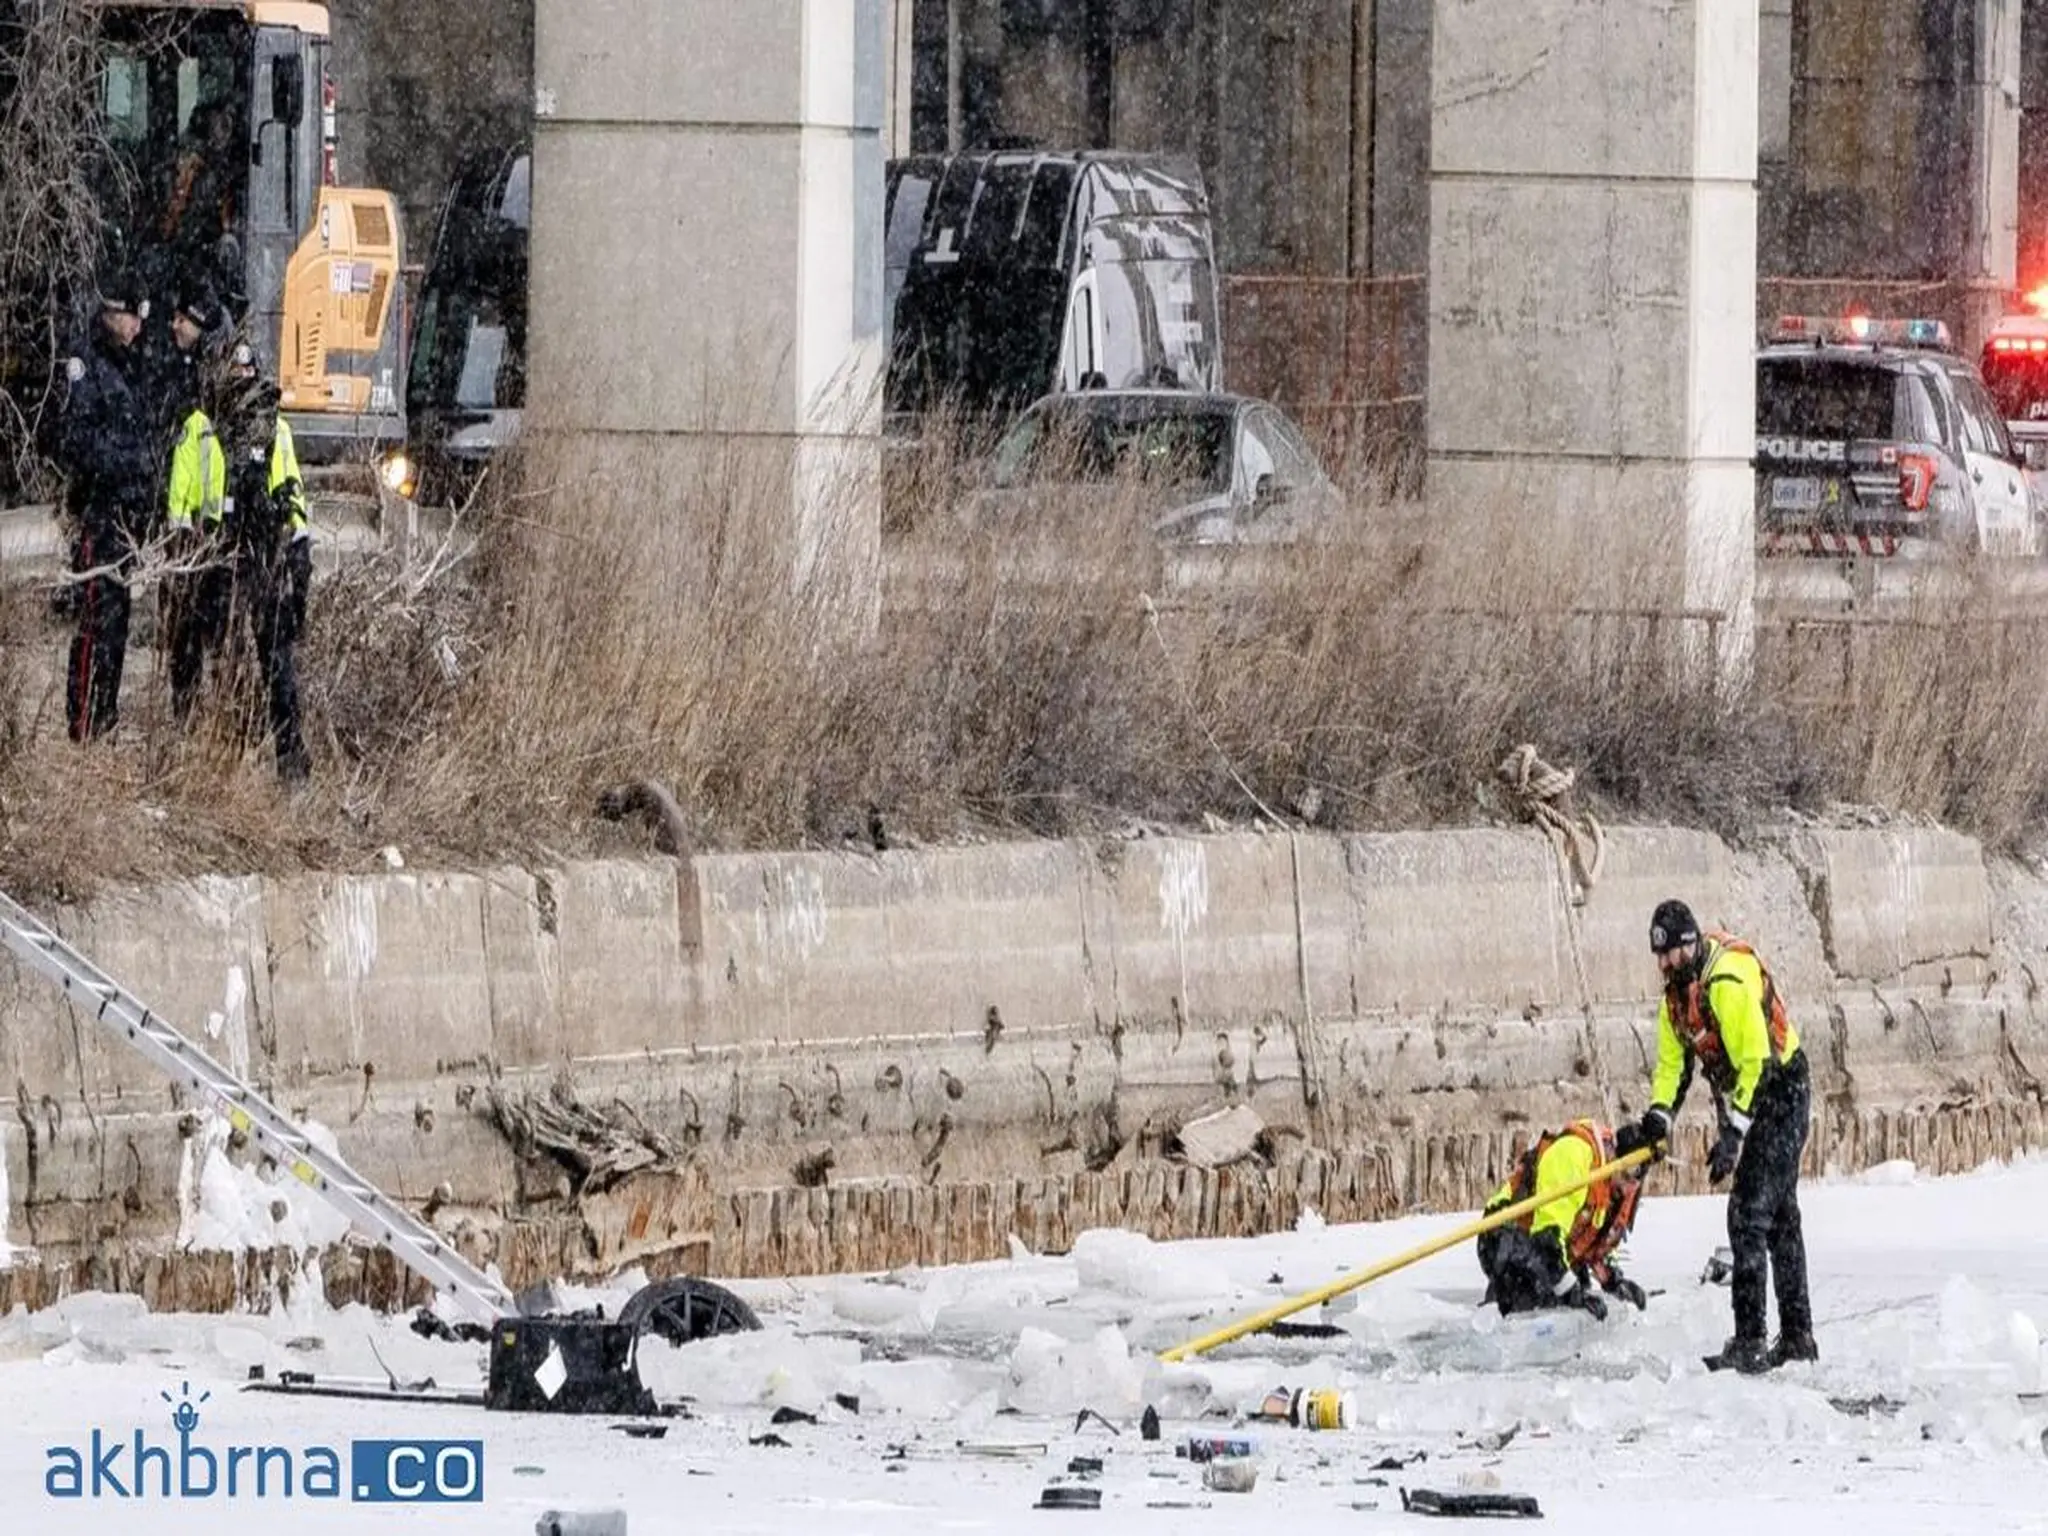 Canada: Death strikes 18-year-old after collision sends vehicle into Keating Channel